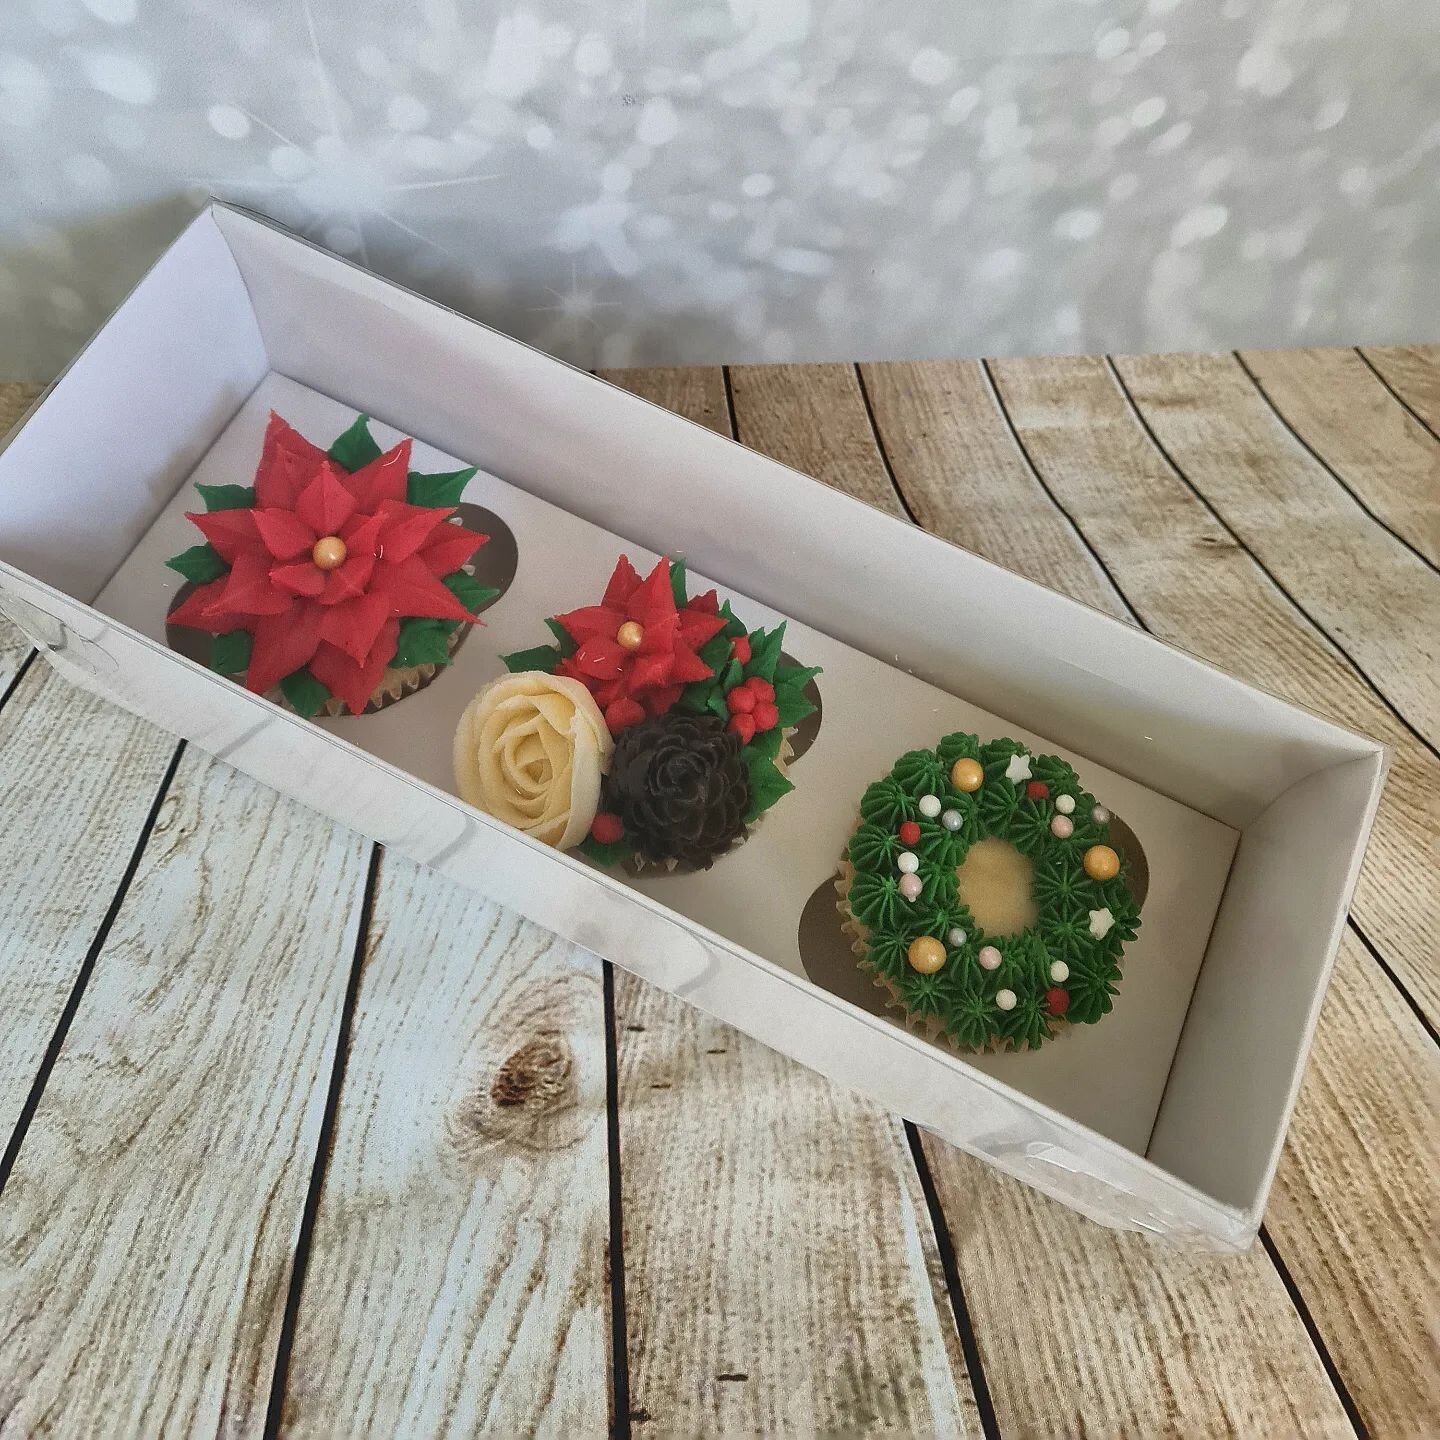 Still some availability for Xmas cupcake orders, to be collected by 23rd Dec

Box of 3 in luxury clear box - &pound;15
Box of 4 - &pound;16
Box of 6 - &pound;25
Box of 8 - &pound;32
Box 12 - &pound;45

Bouquet of 7 - &pound;35
Bouquet of 12 - &pound;